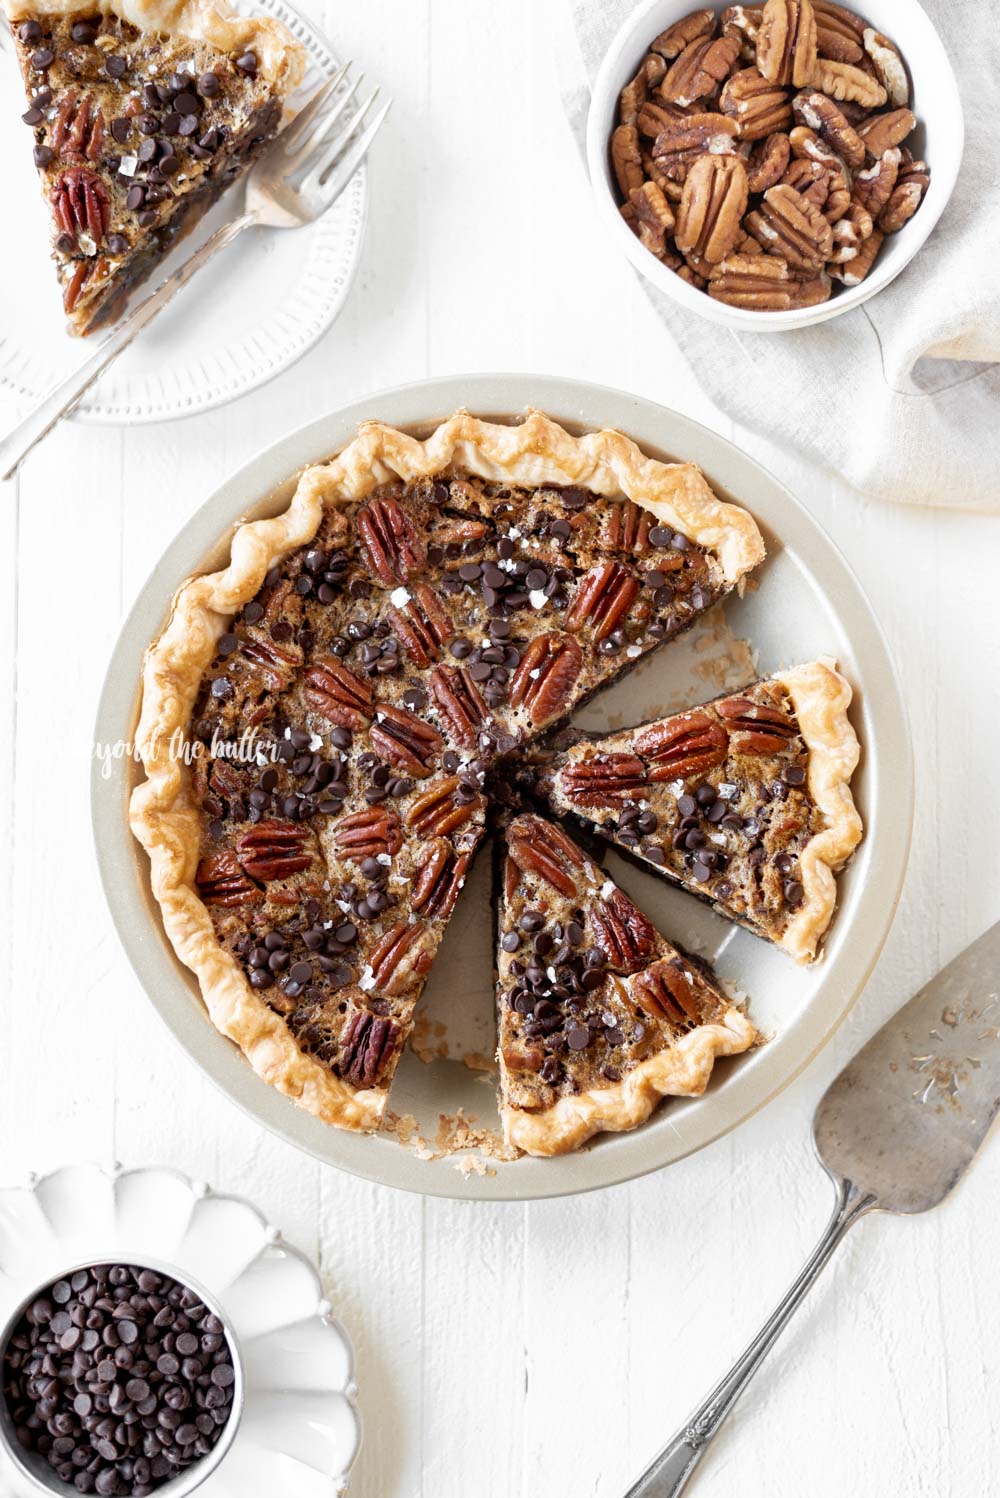 Overhead image showing slices of chocolate pecan pie in pie plate with slices of pie on dessert plates and bowl of chocolate chips and pecans on white wood table.